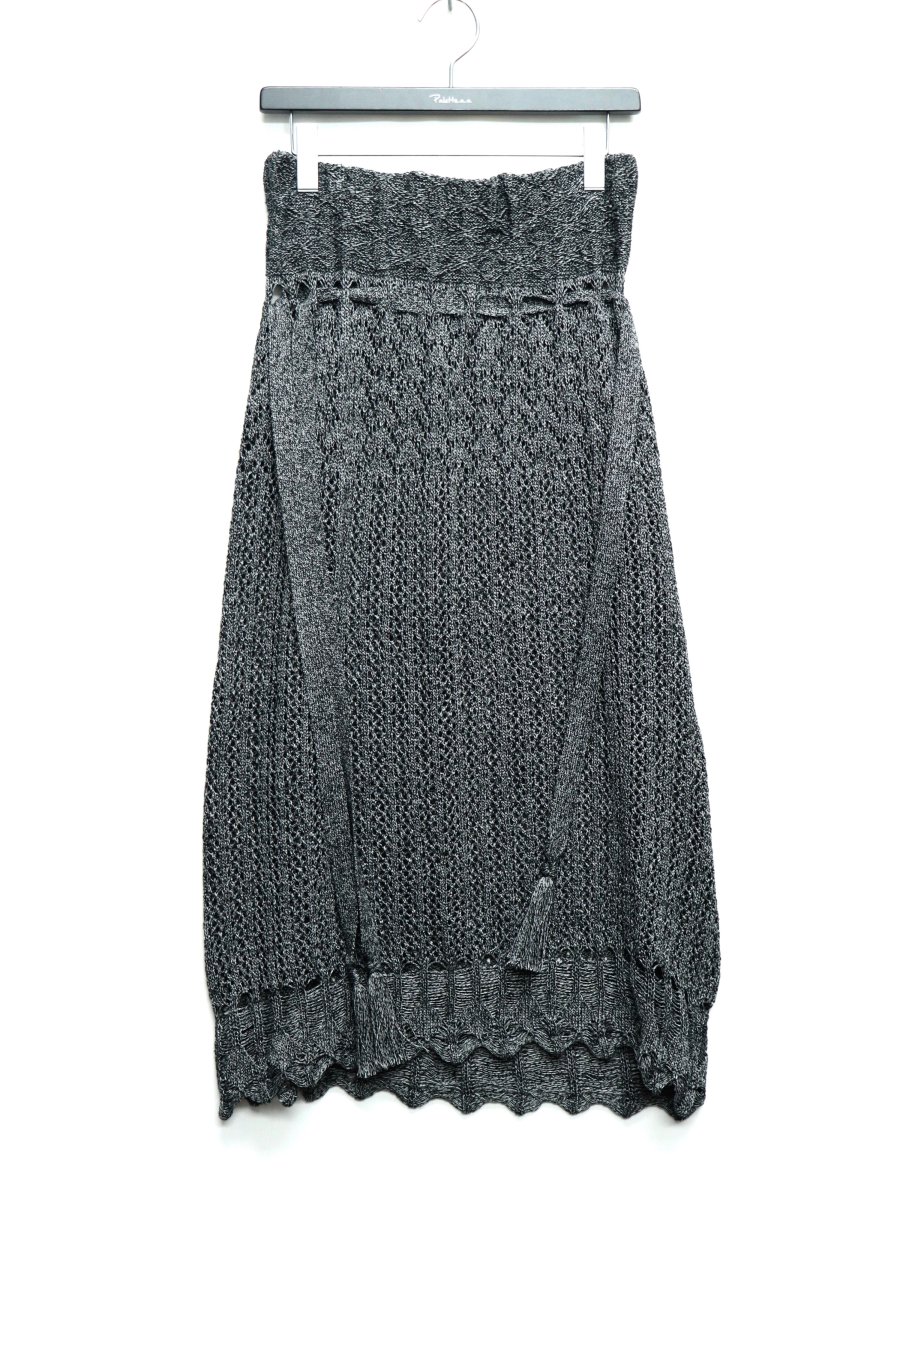 30%OFFLENZ  KNIT SKIRT<img class='new_mark_img2' src='https://img.shop-pro.jp/img/new/icons20.gif' style='border:none;display:inline;margin:0px;padding:0px;width:auto;' />